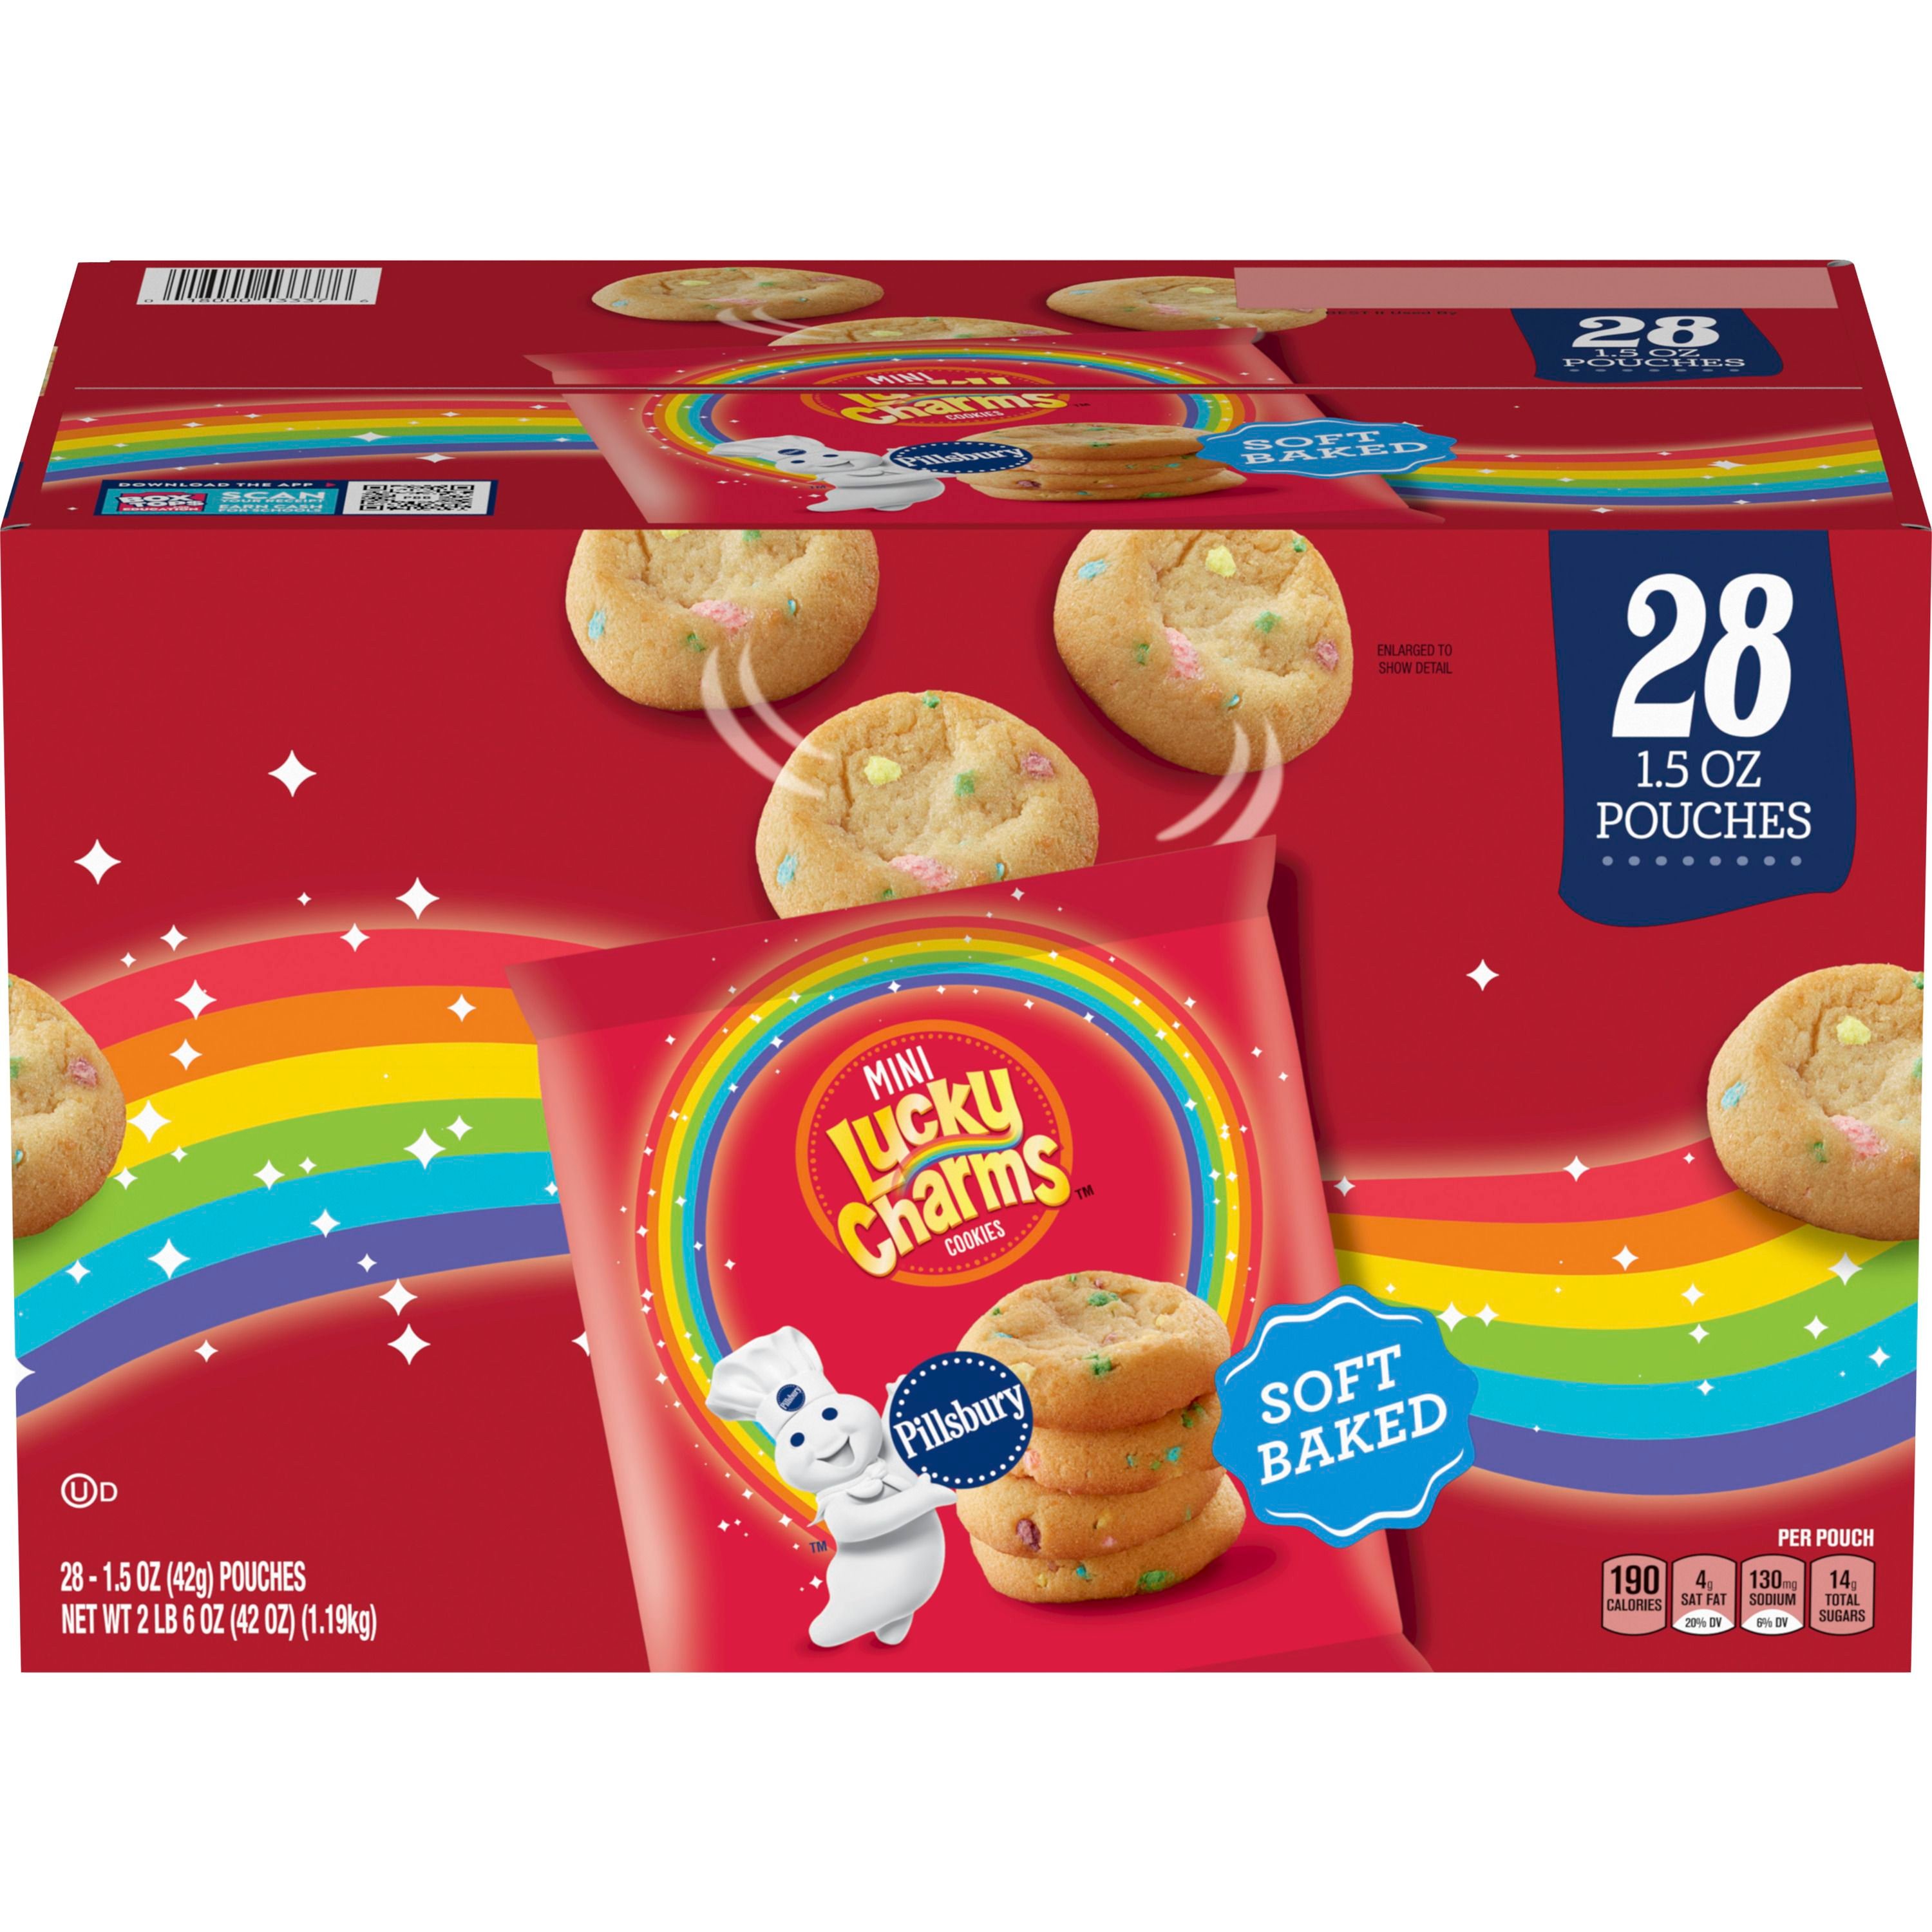 Pillsbury Lucky Charms Mini Soft Baked Cookies, Snack Bags, 28 ct - Front